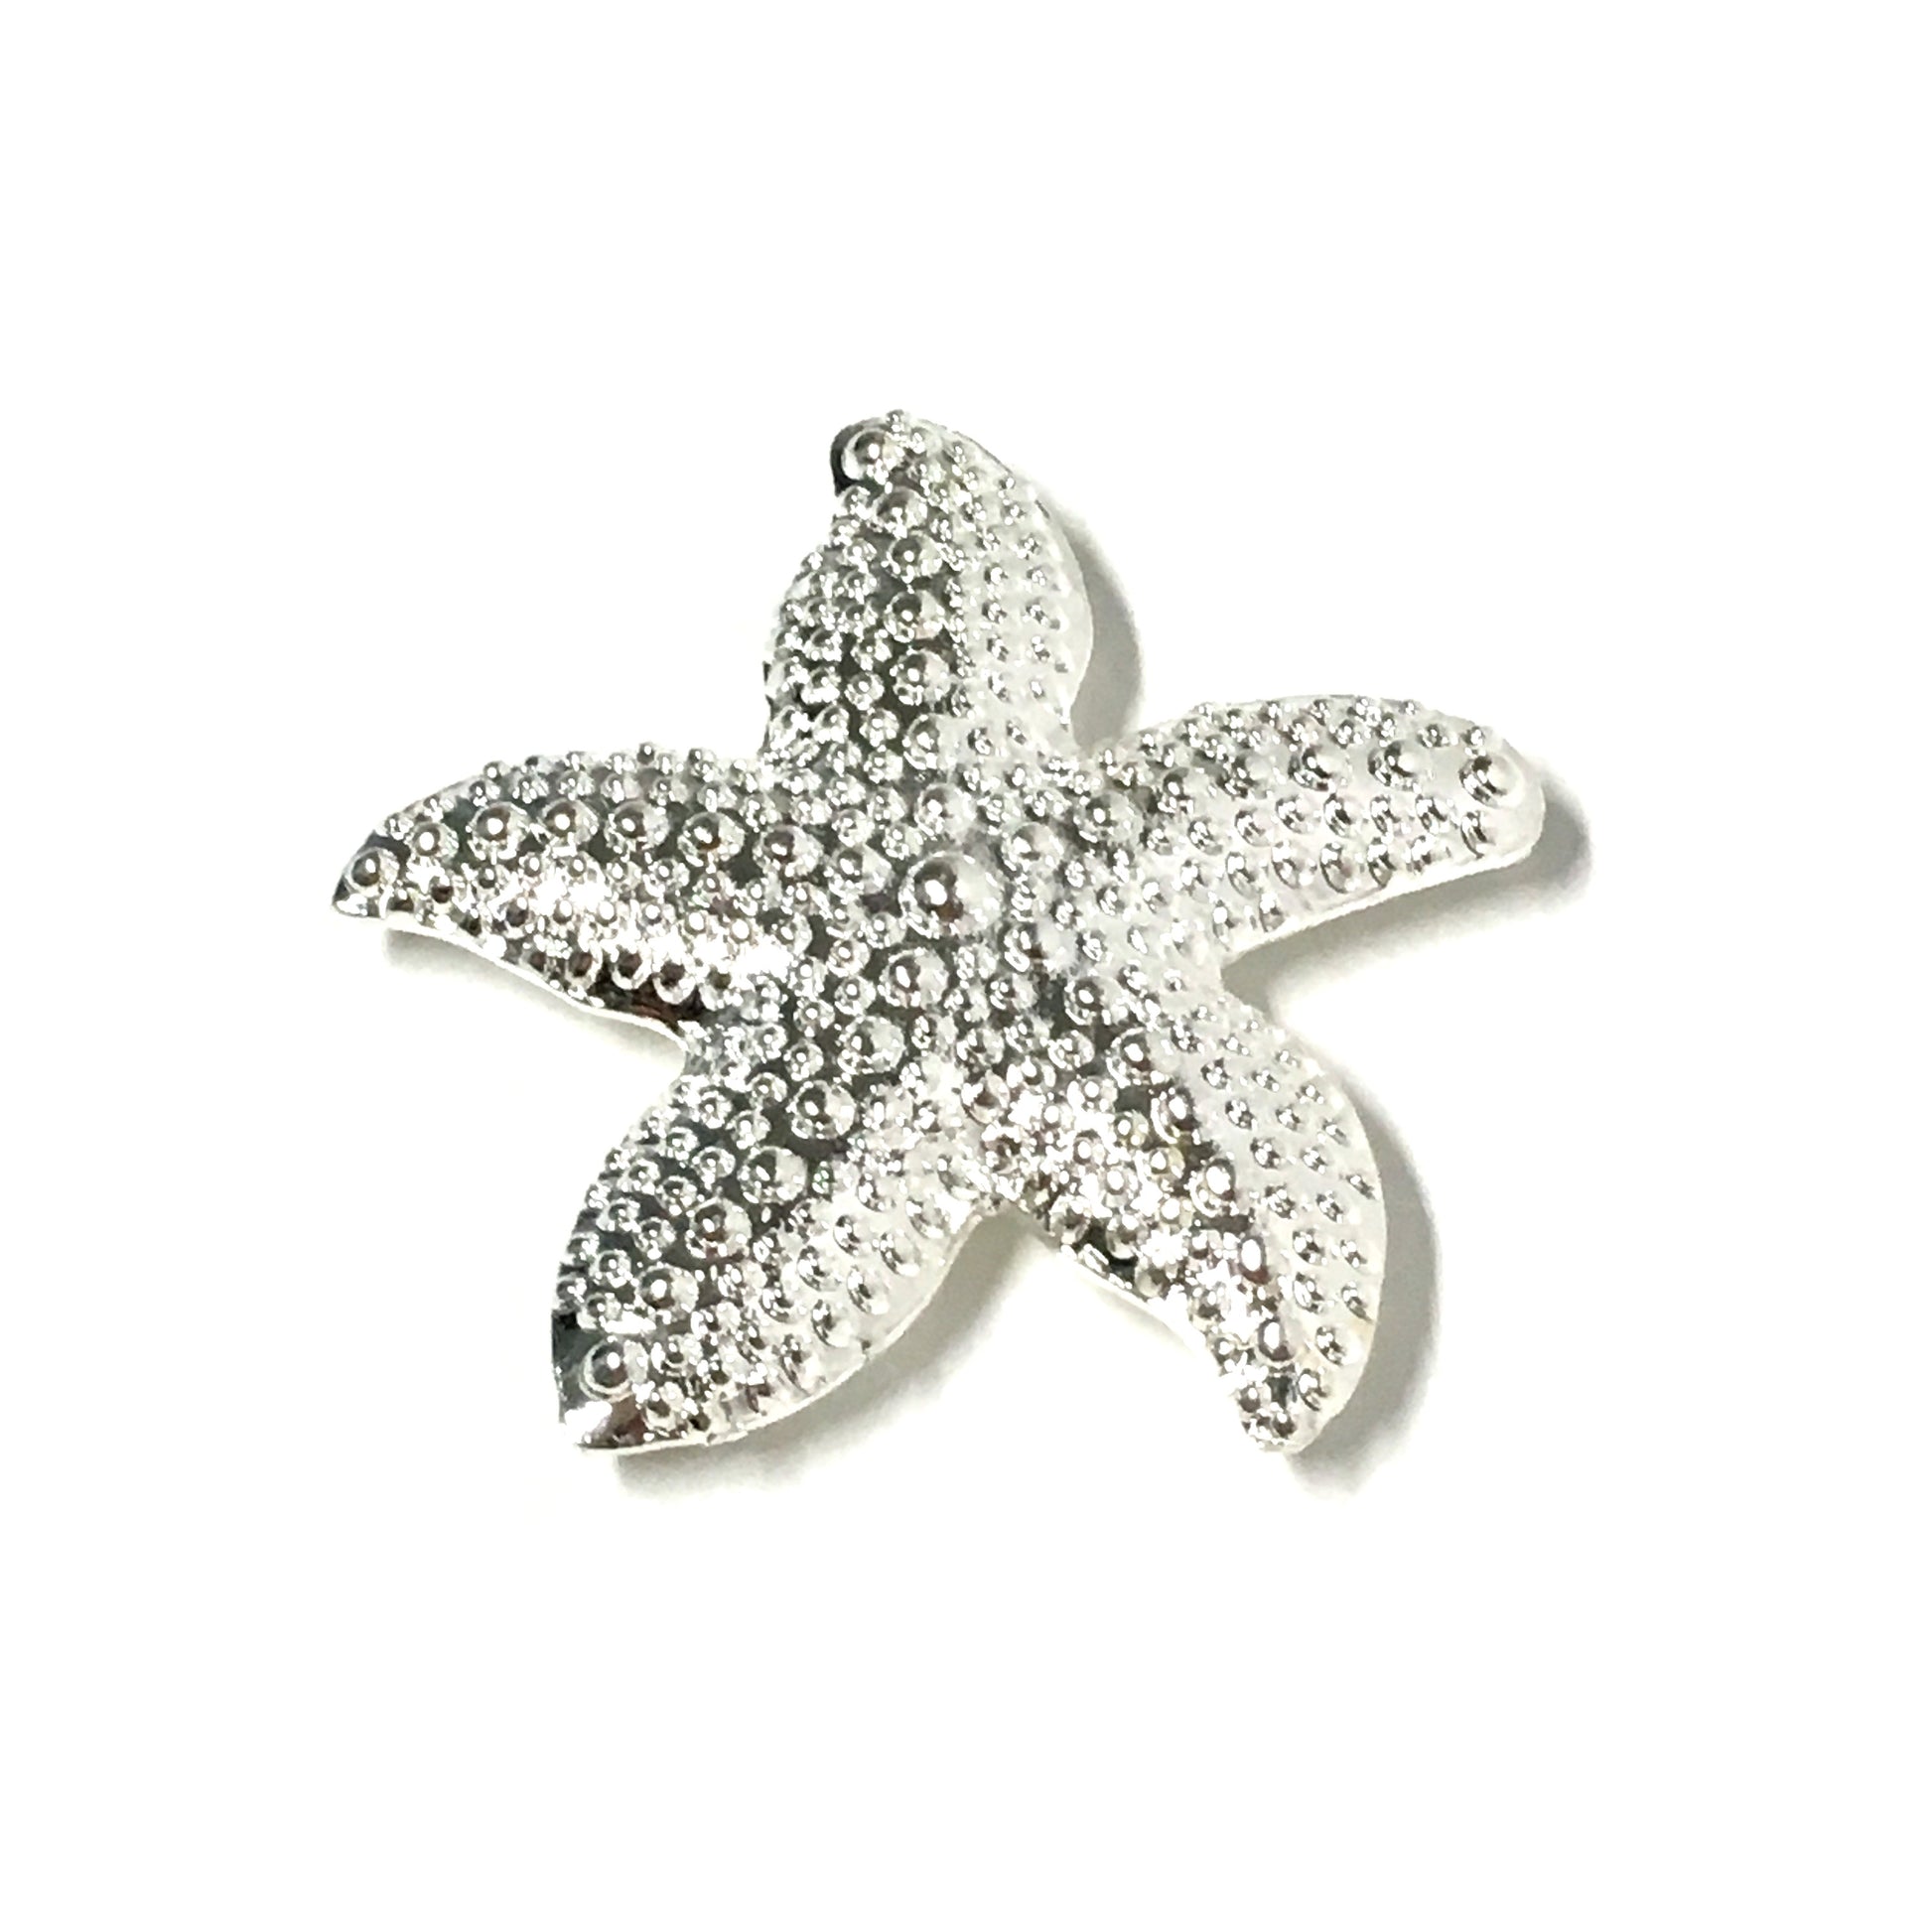 Candle Magnet in silver - Starfish shaped magnet